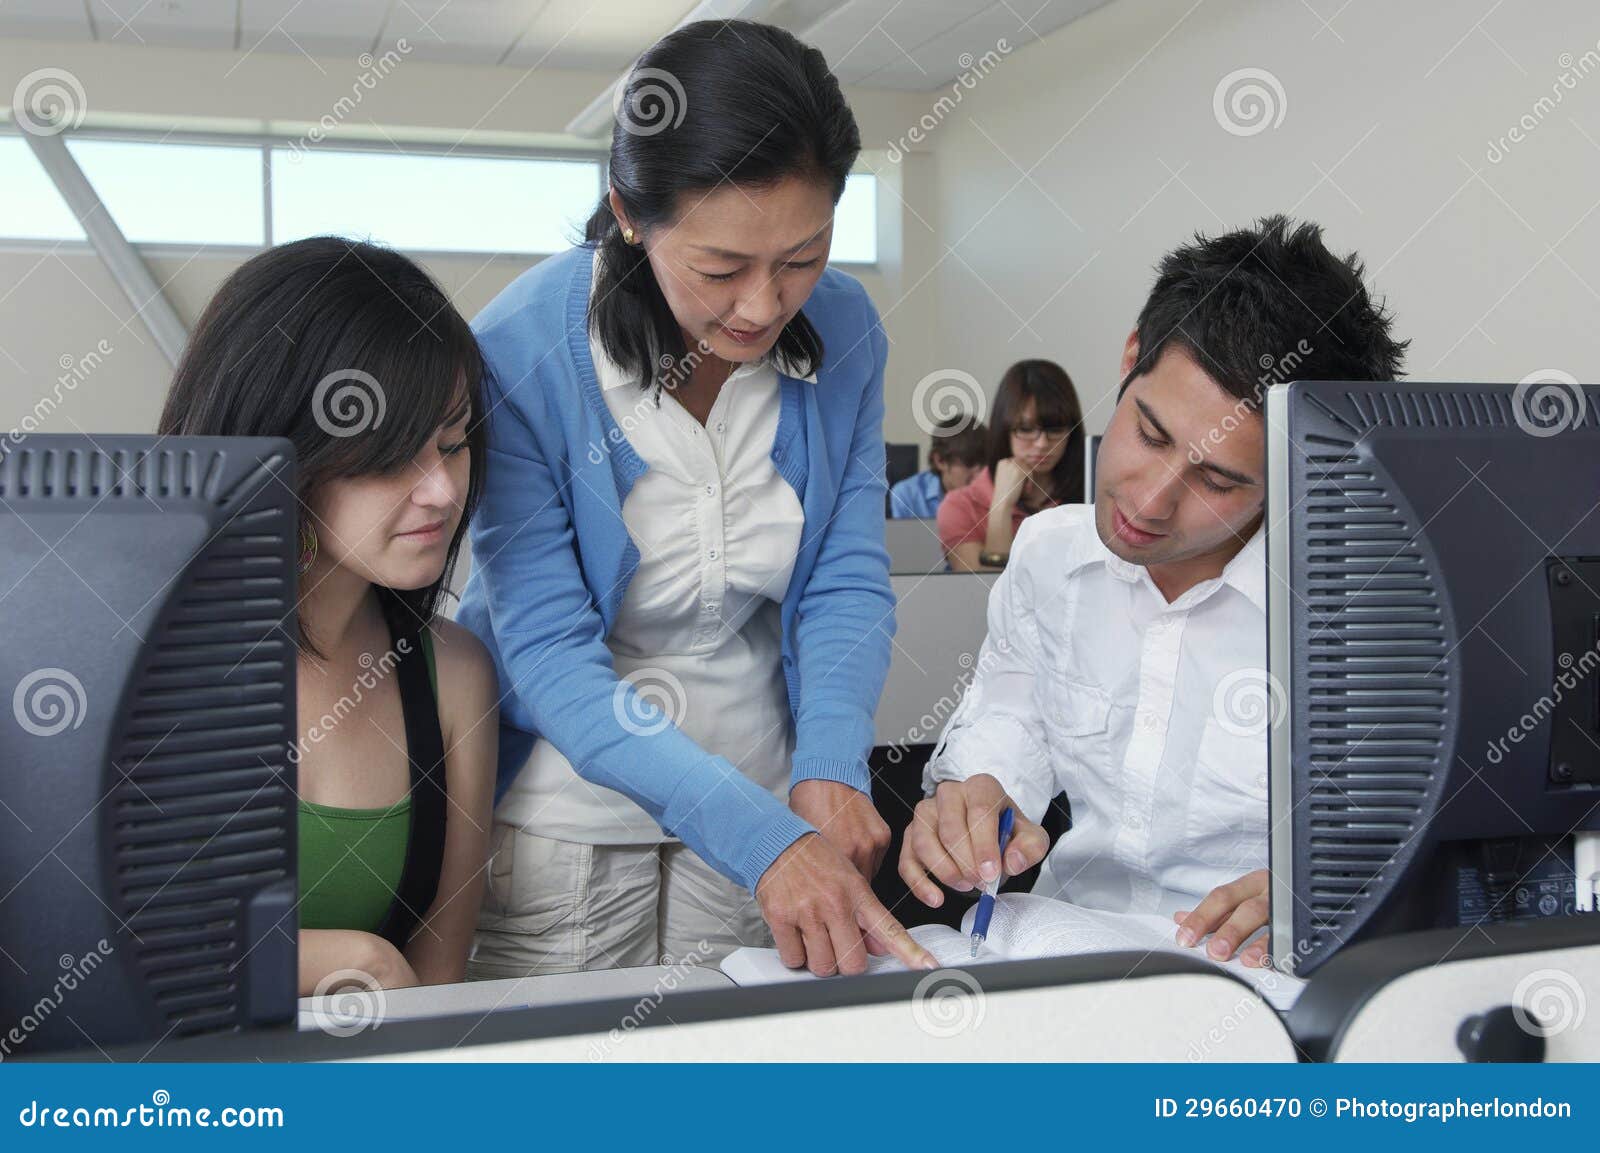 teacher assisting students in computer lab